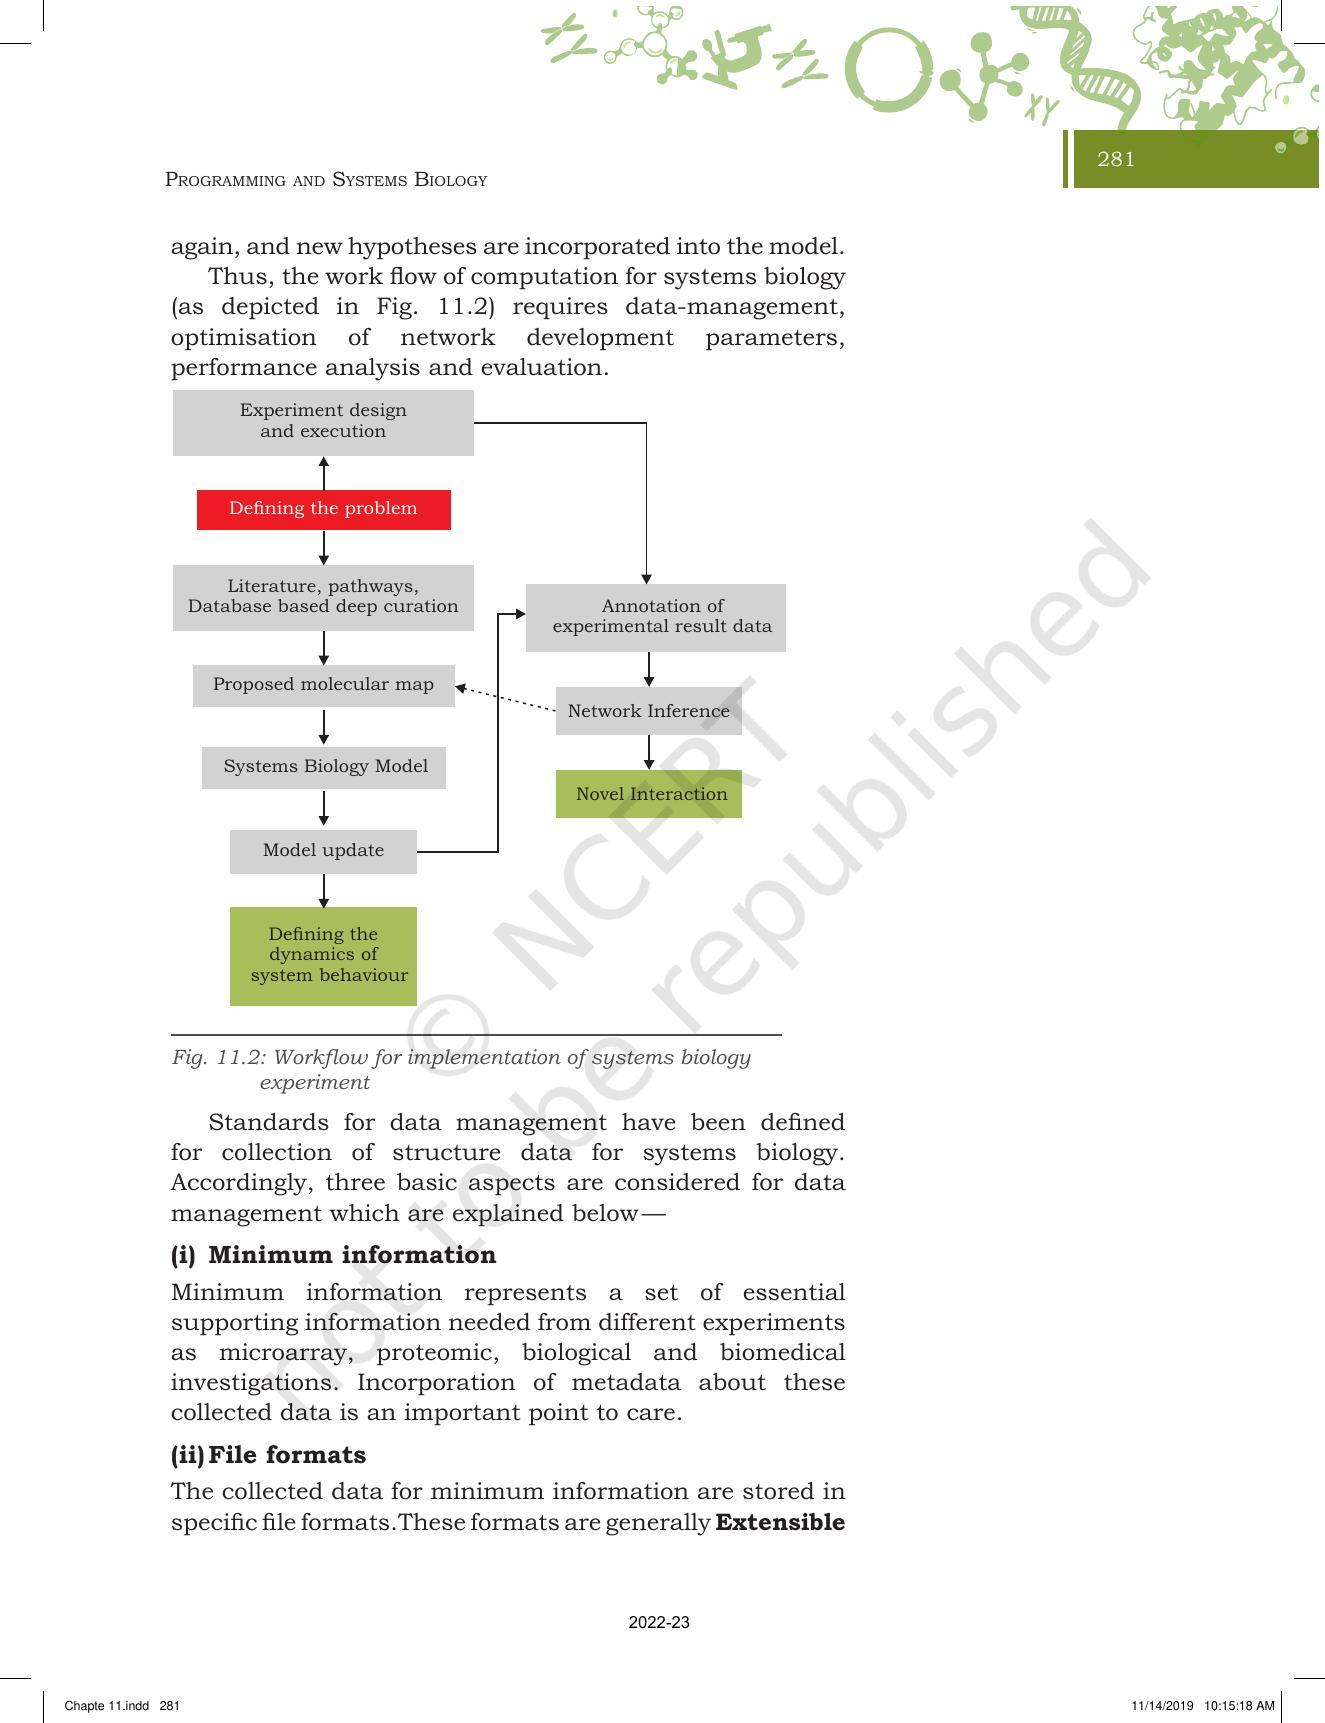 NCERT Book for Class 11 Biotechnology Chapter 11 Programming and Systems Biology - Page 6